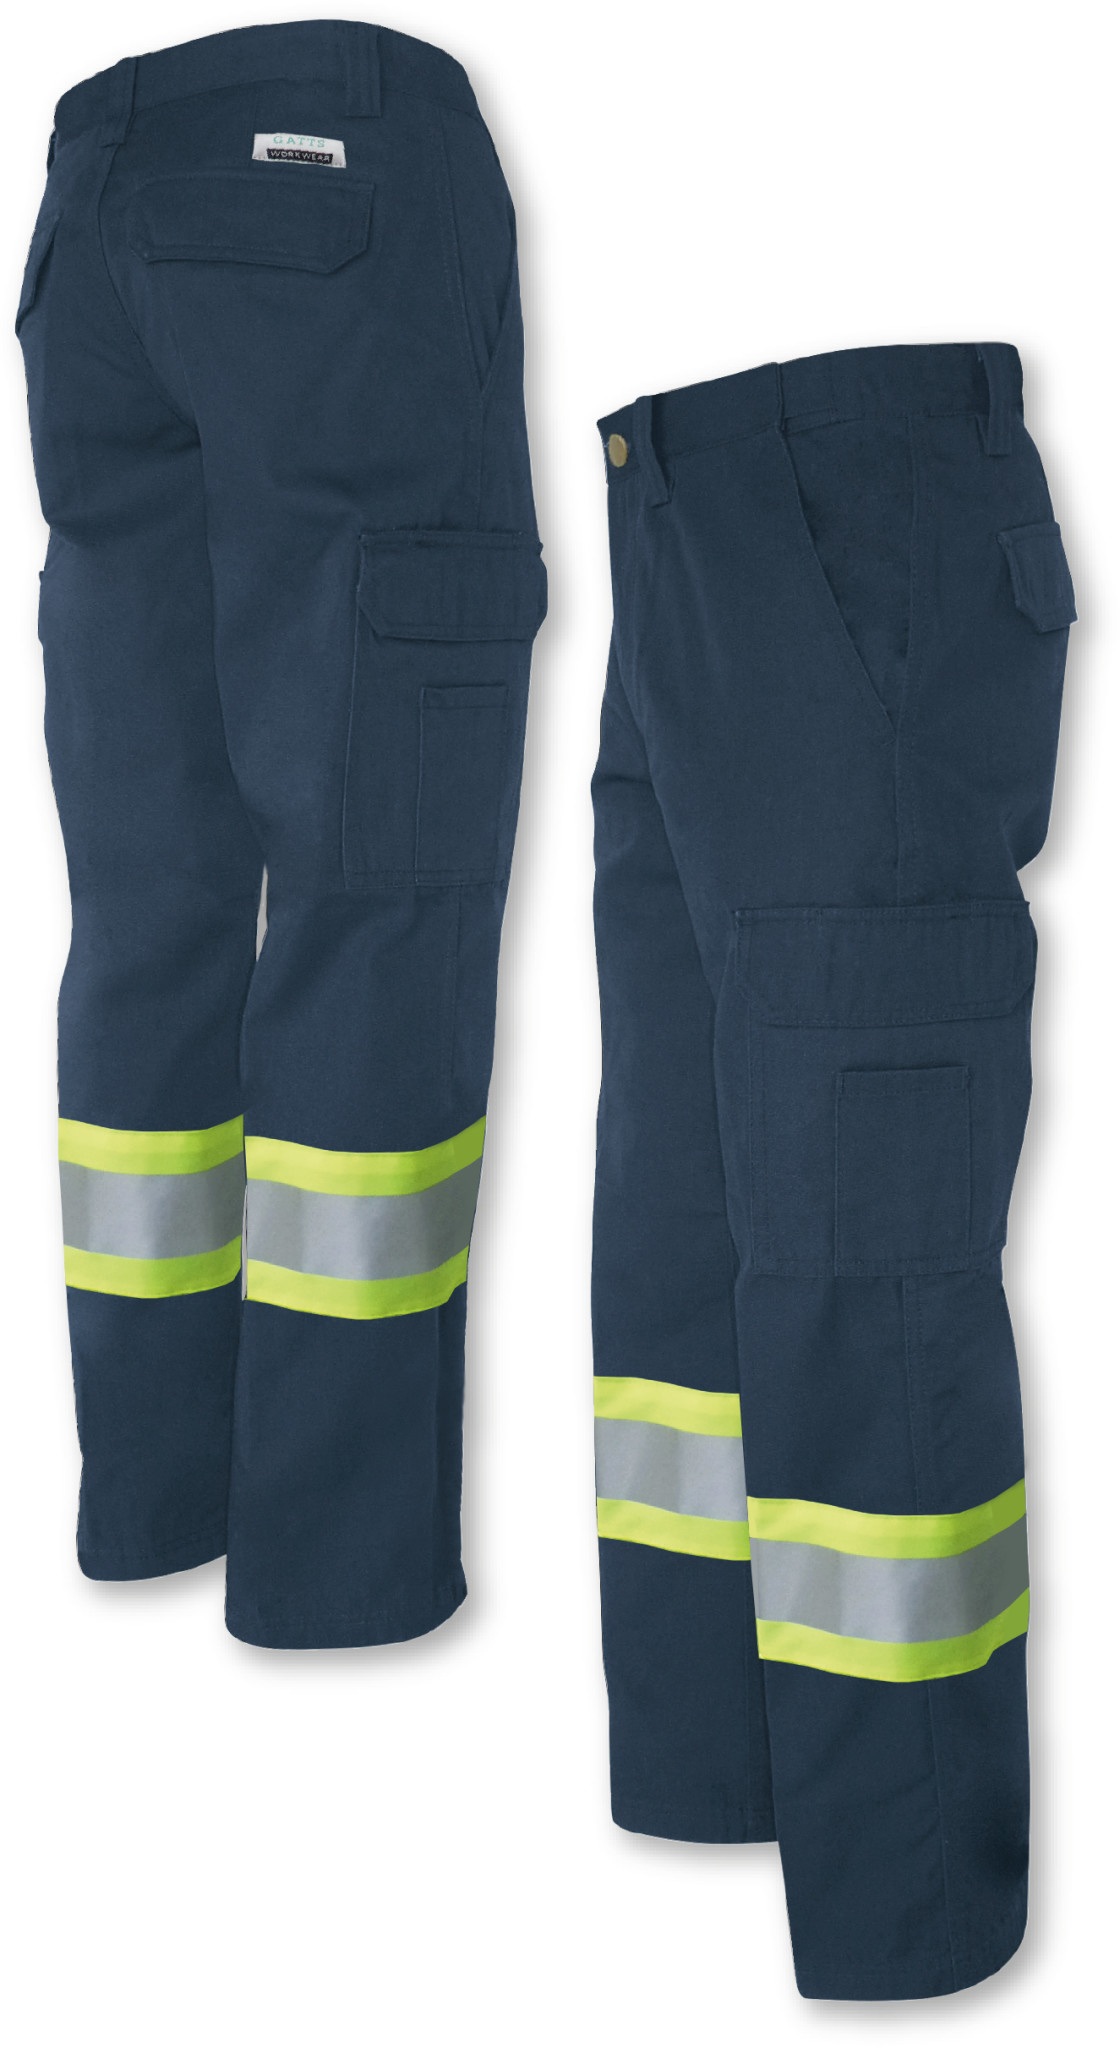 Women's V2 EMS Pant – First Tactical